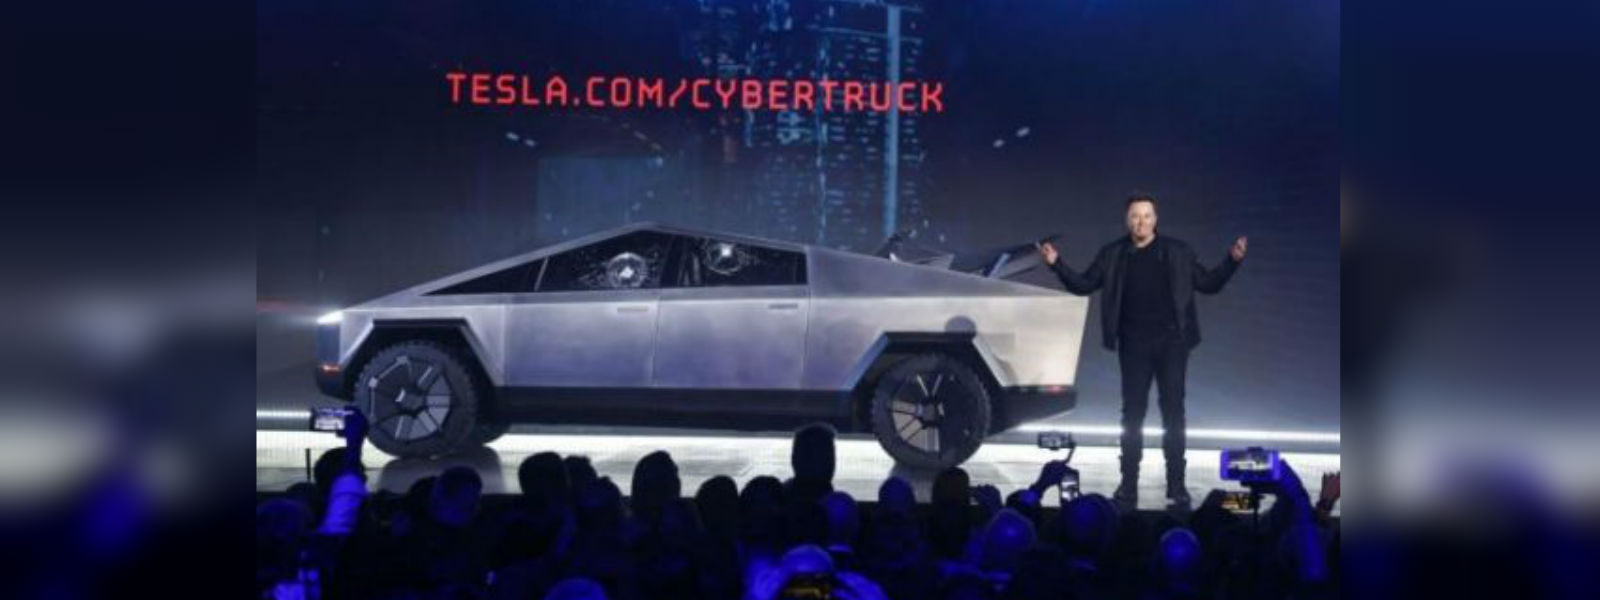 tesla shares rise as musk says cybertruck orders hit